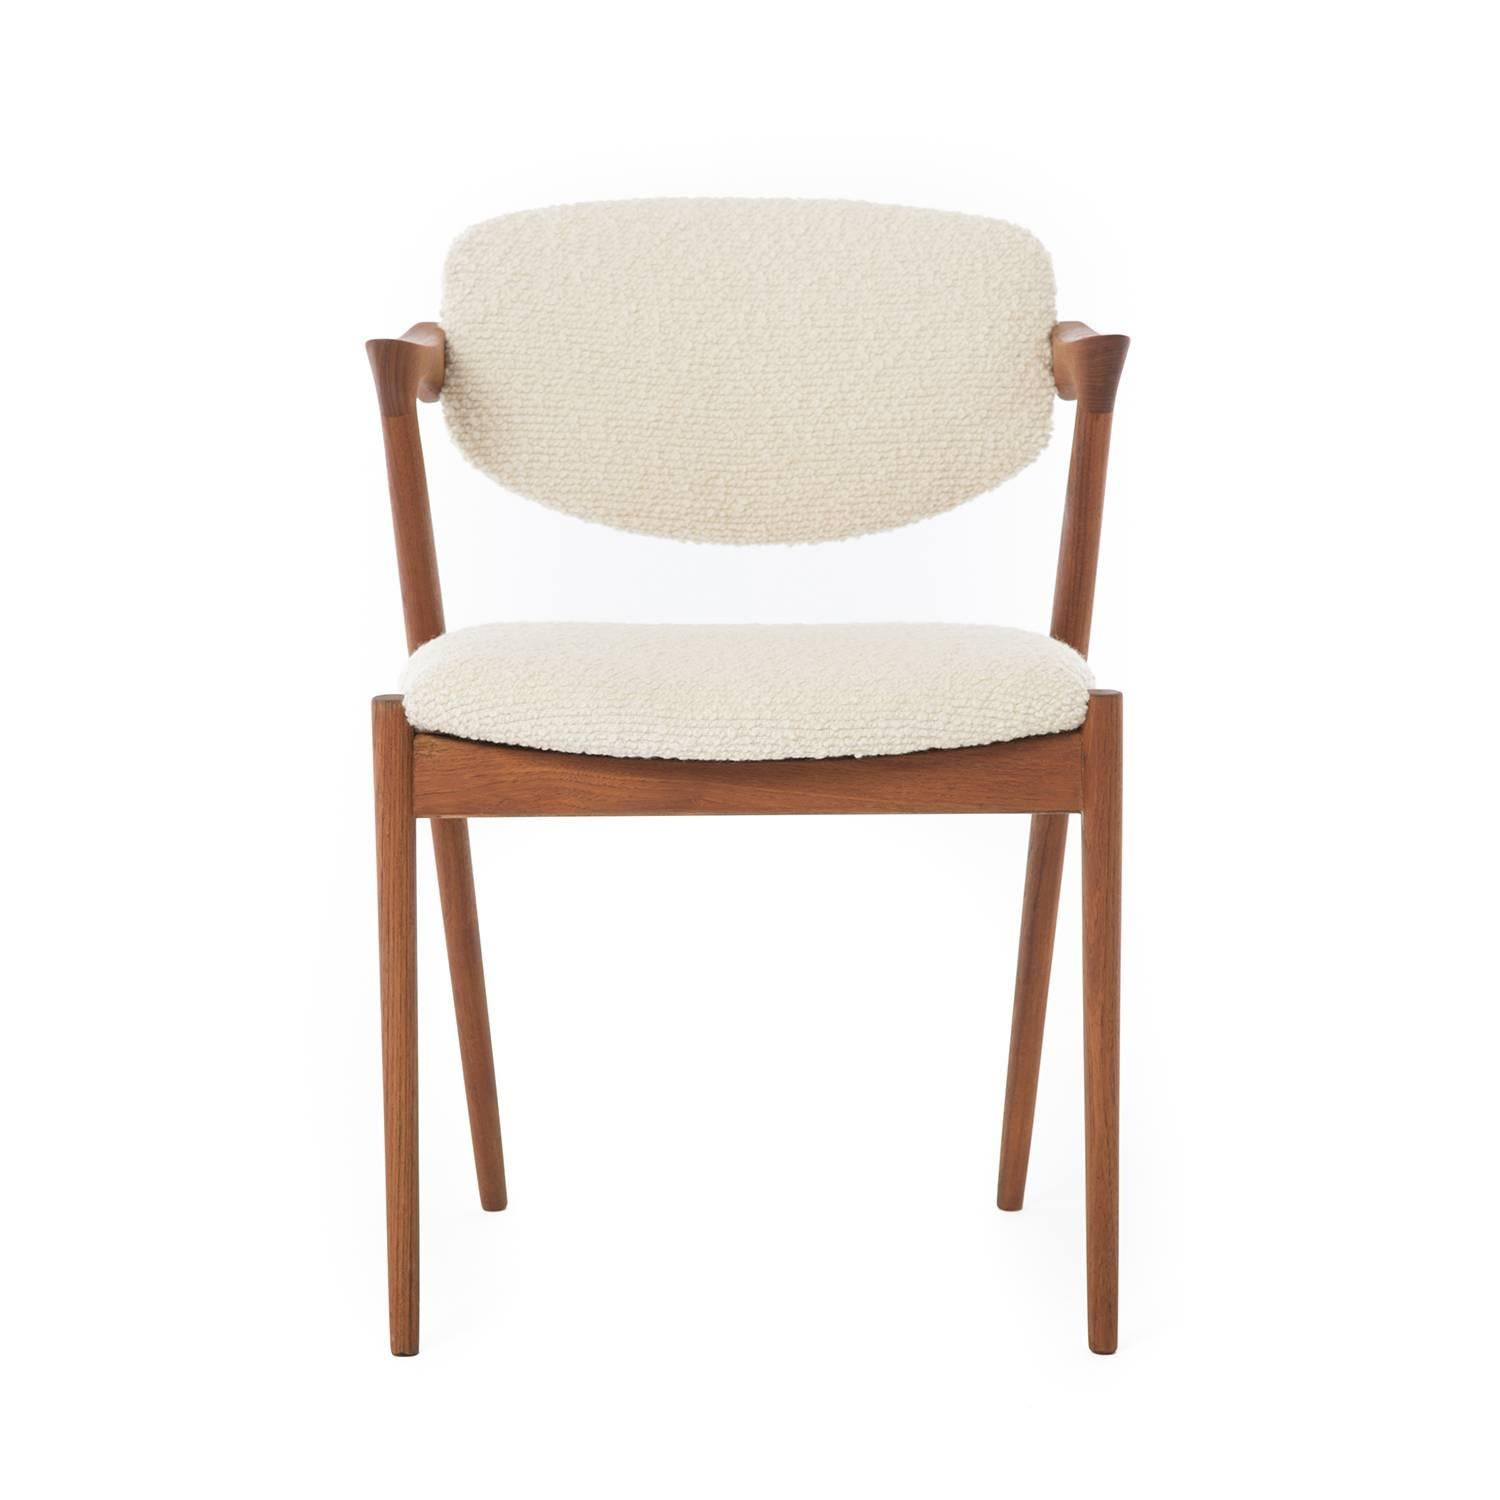 A gorgeous Kai Kristiansen occasional chair with Z-shaped arms. New upholstery in ivory "Cozy" boucle by Luna Textiles. (Chair shown in grey upholstery is sold). 

Professional, skilled furniture restoration is an integral part of what we